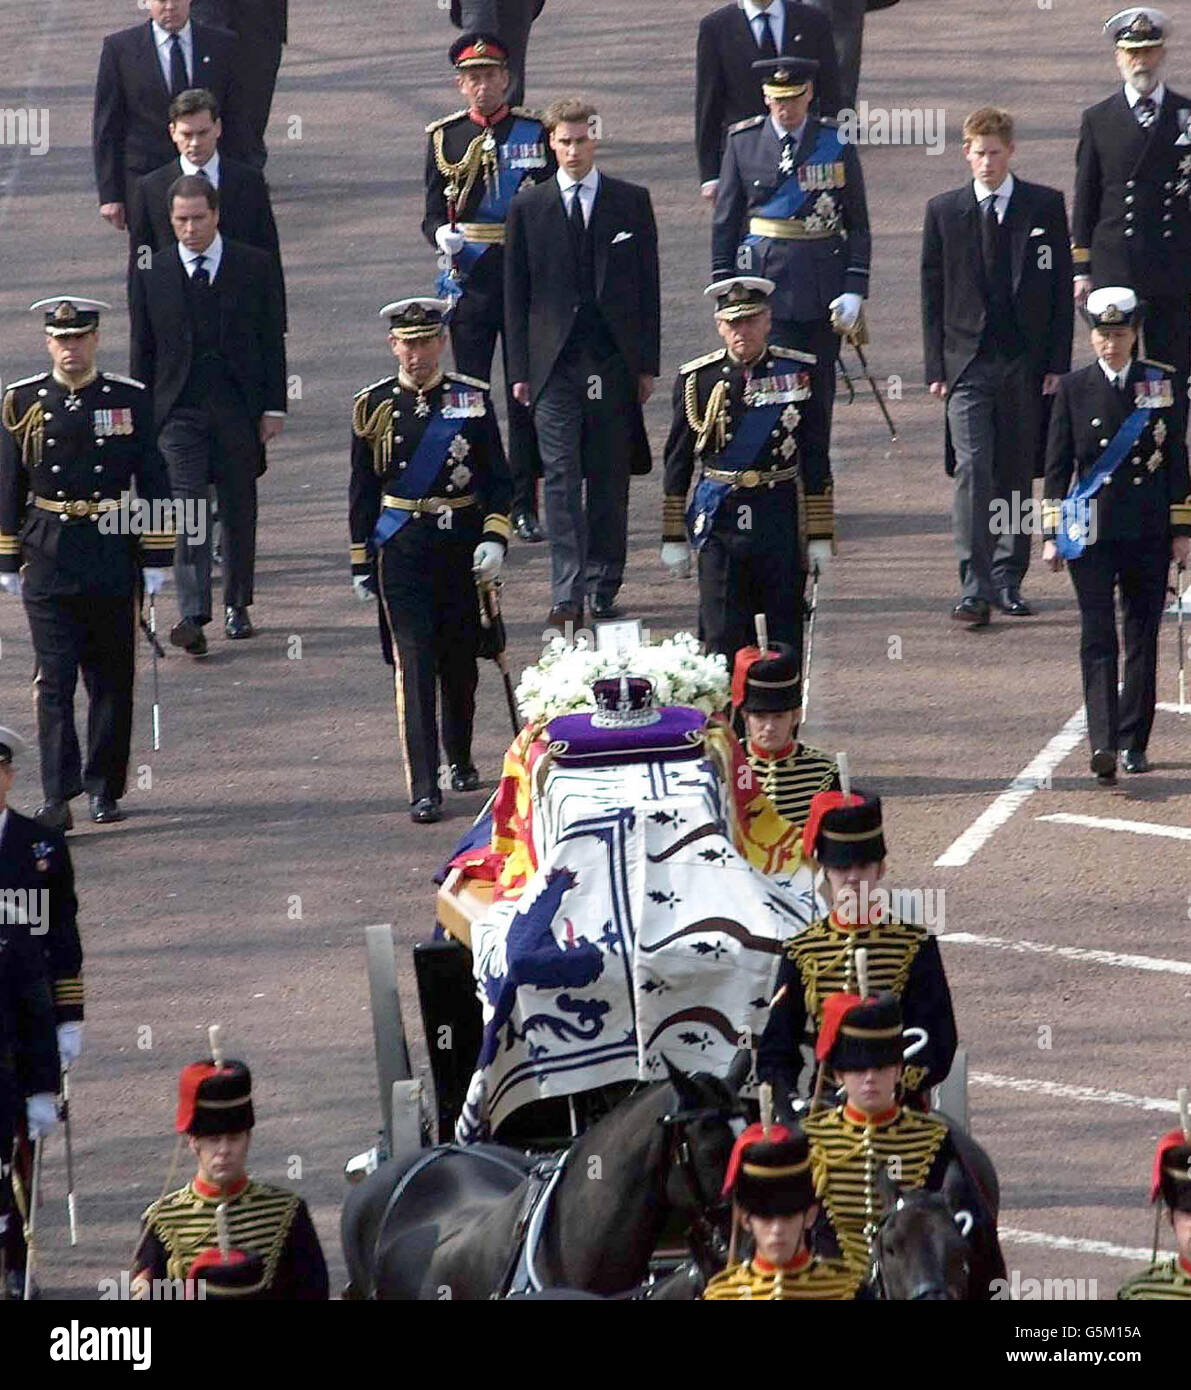 Members of the Royal Family including the Duke of York, the Prince of Wales, the Duke of Edinburgh, the Princess Royal, Princes Harry and William, Viscount Linley and Daniel Chatto, follow on behind the coffin of Queen Elizabeth, the Queen Mother. *...., during a procession Friday April 5, 2002, from the Queen's Chapel to Westminster Hall, where she will lie-in-state until her funeral at Westminster Abbey on Tuesday. Stock Photo